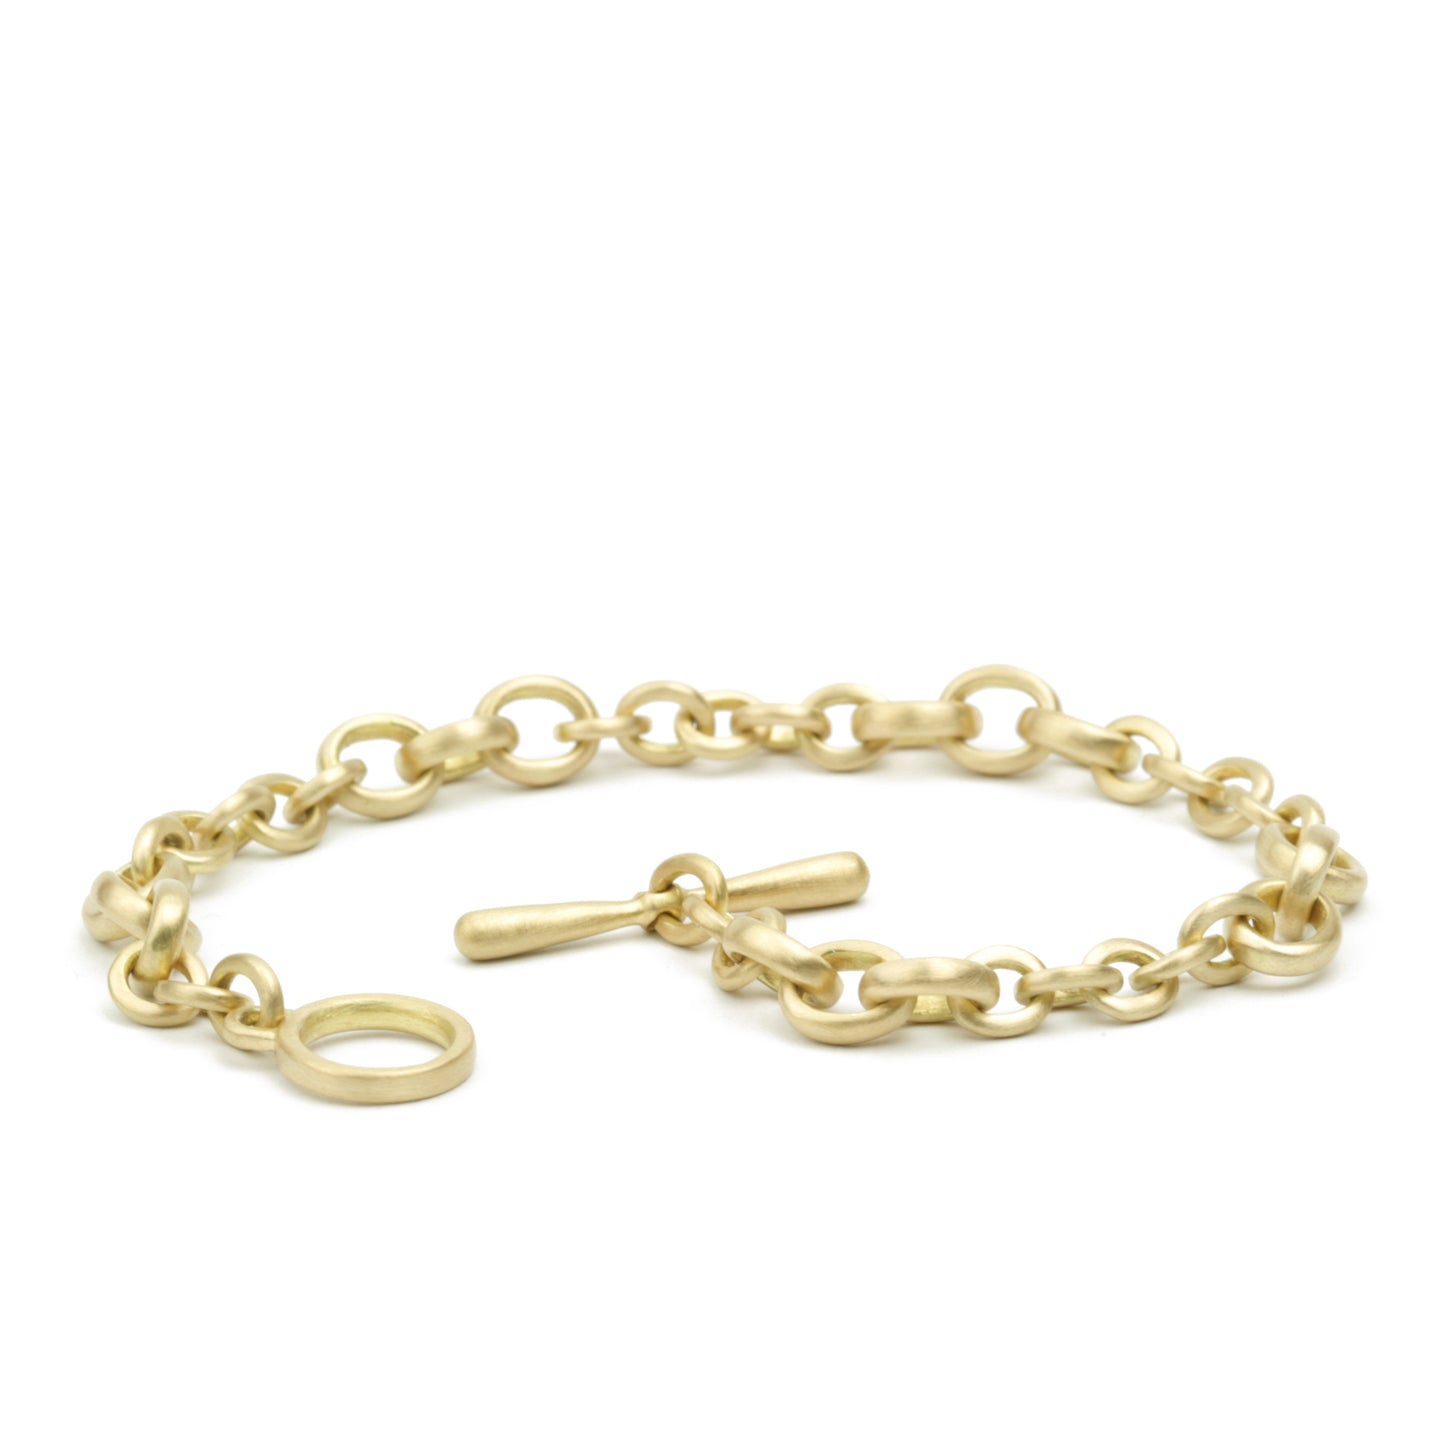 City Link Bracelet Small, coiled